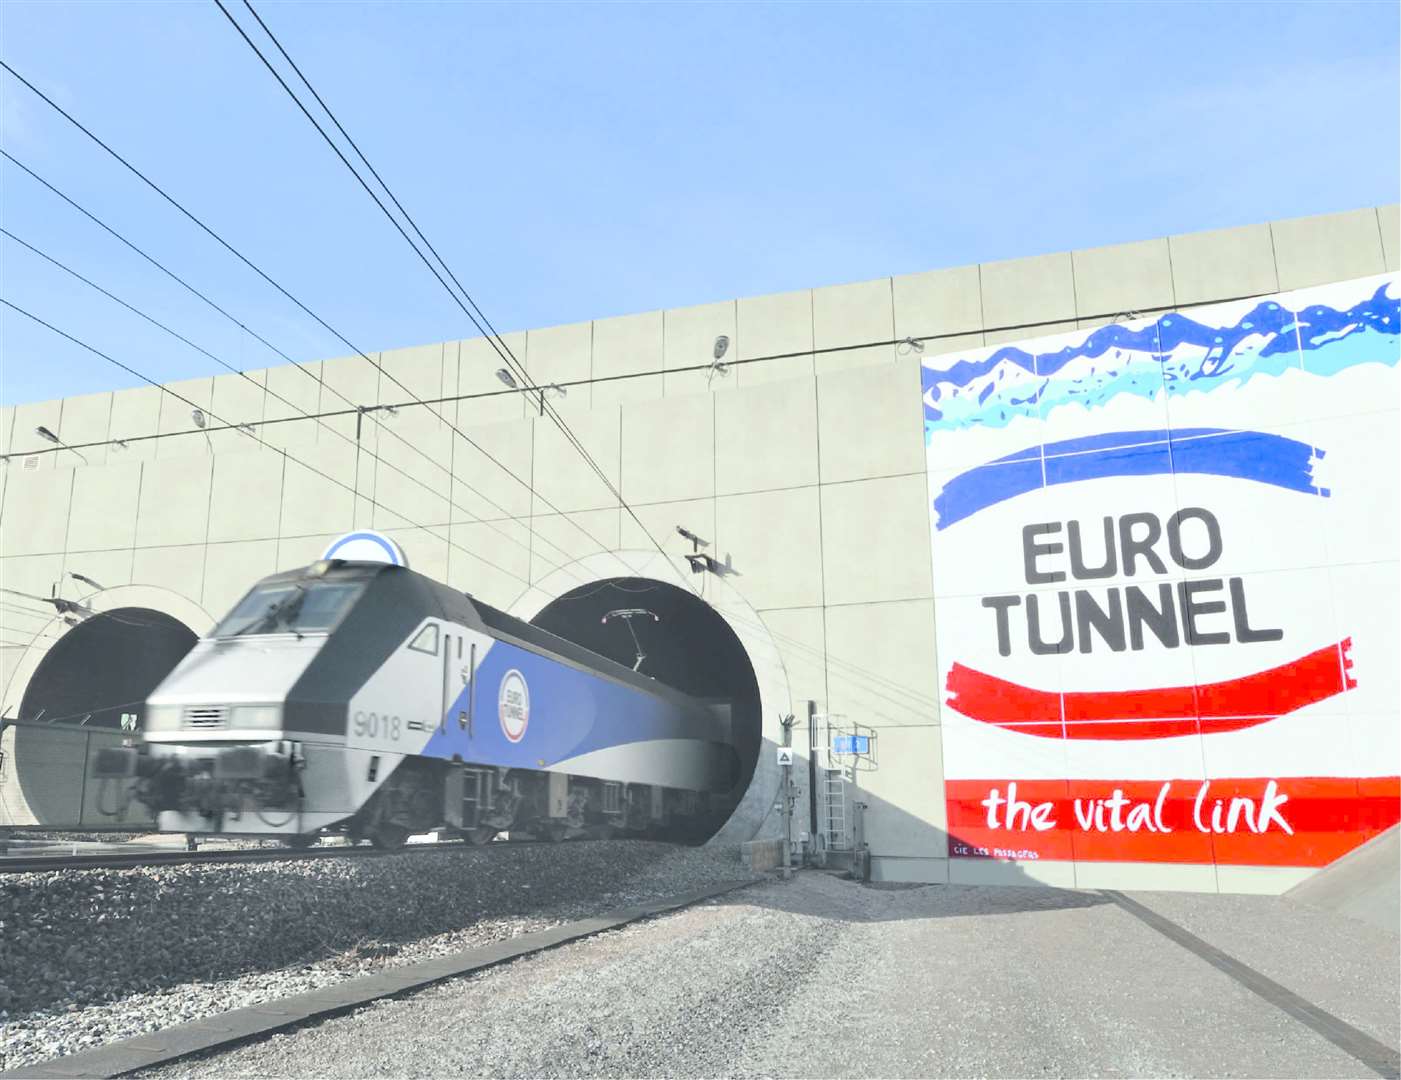 Eurotunnel has seen a huge drop in passenger numbers during the pandemic - but freight continues to use the essential link